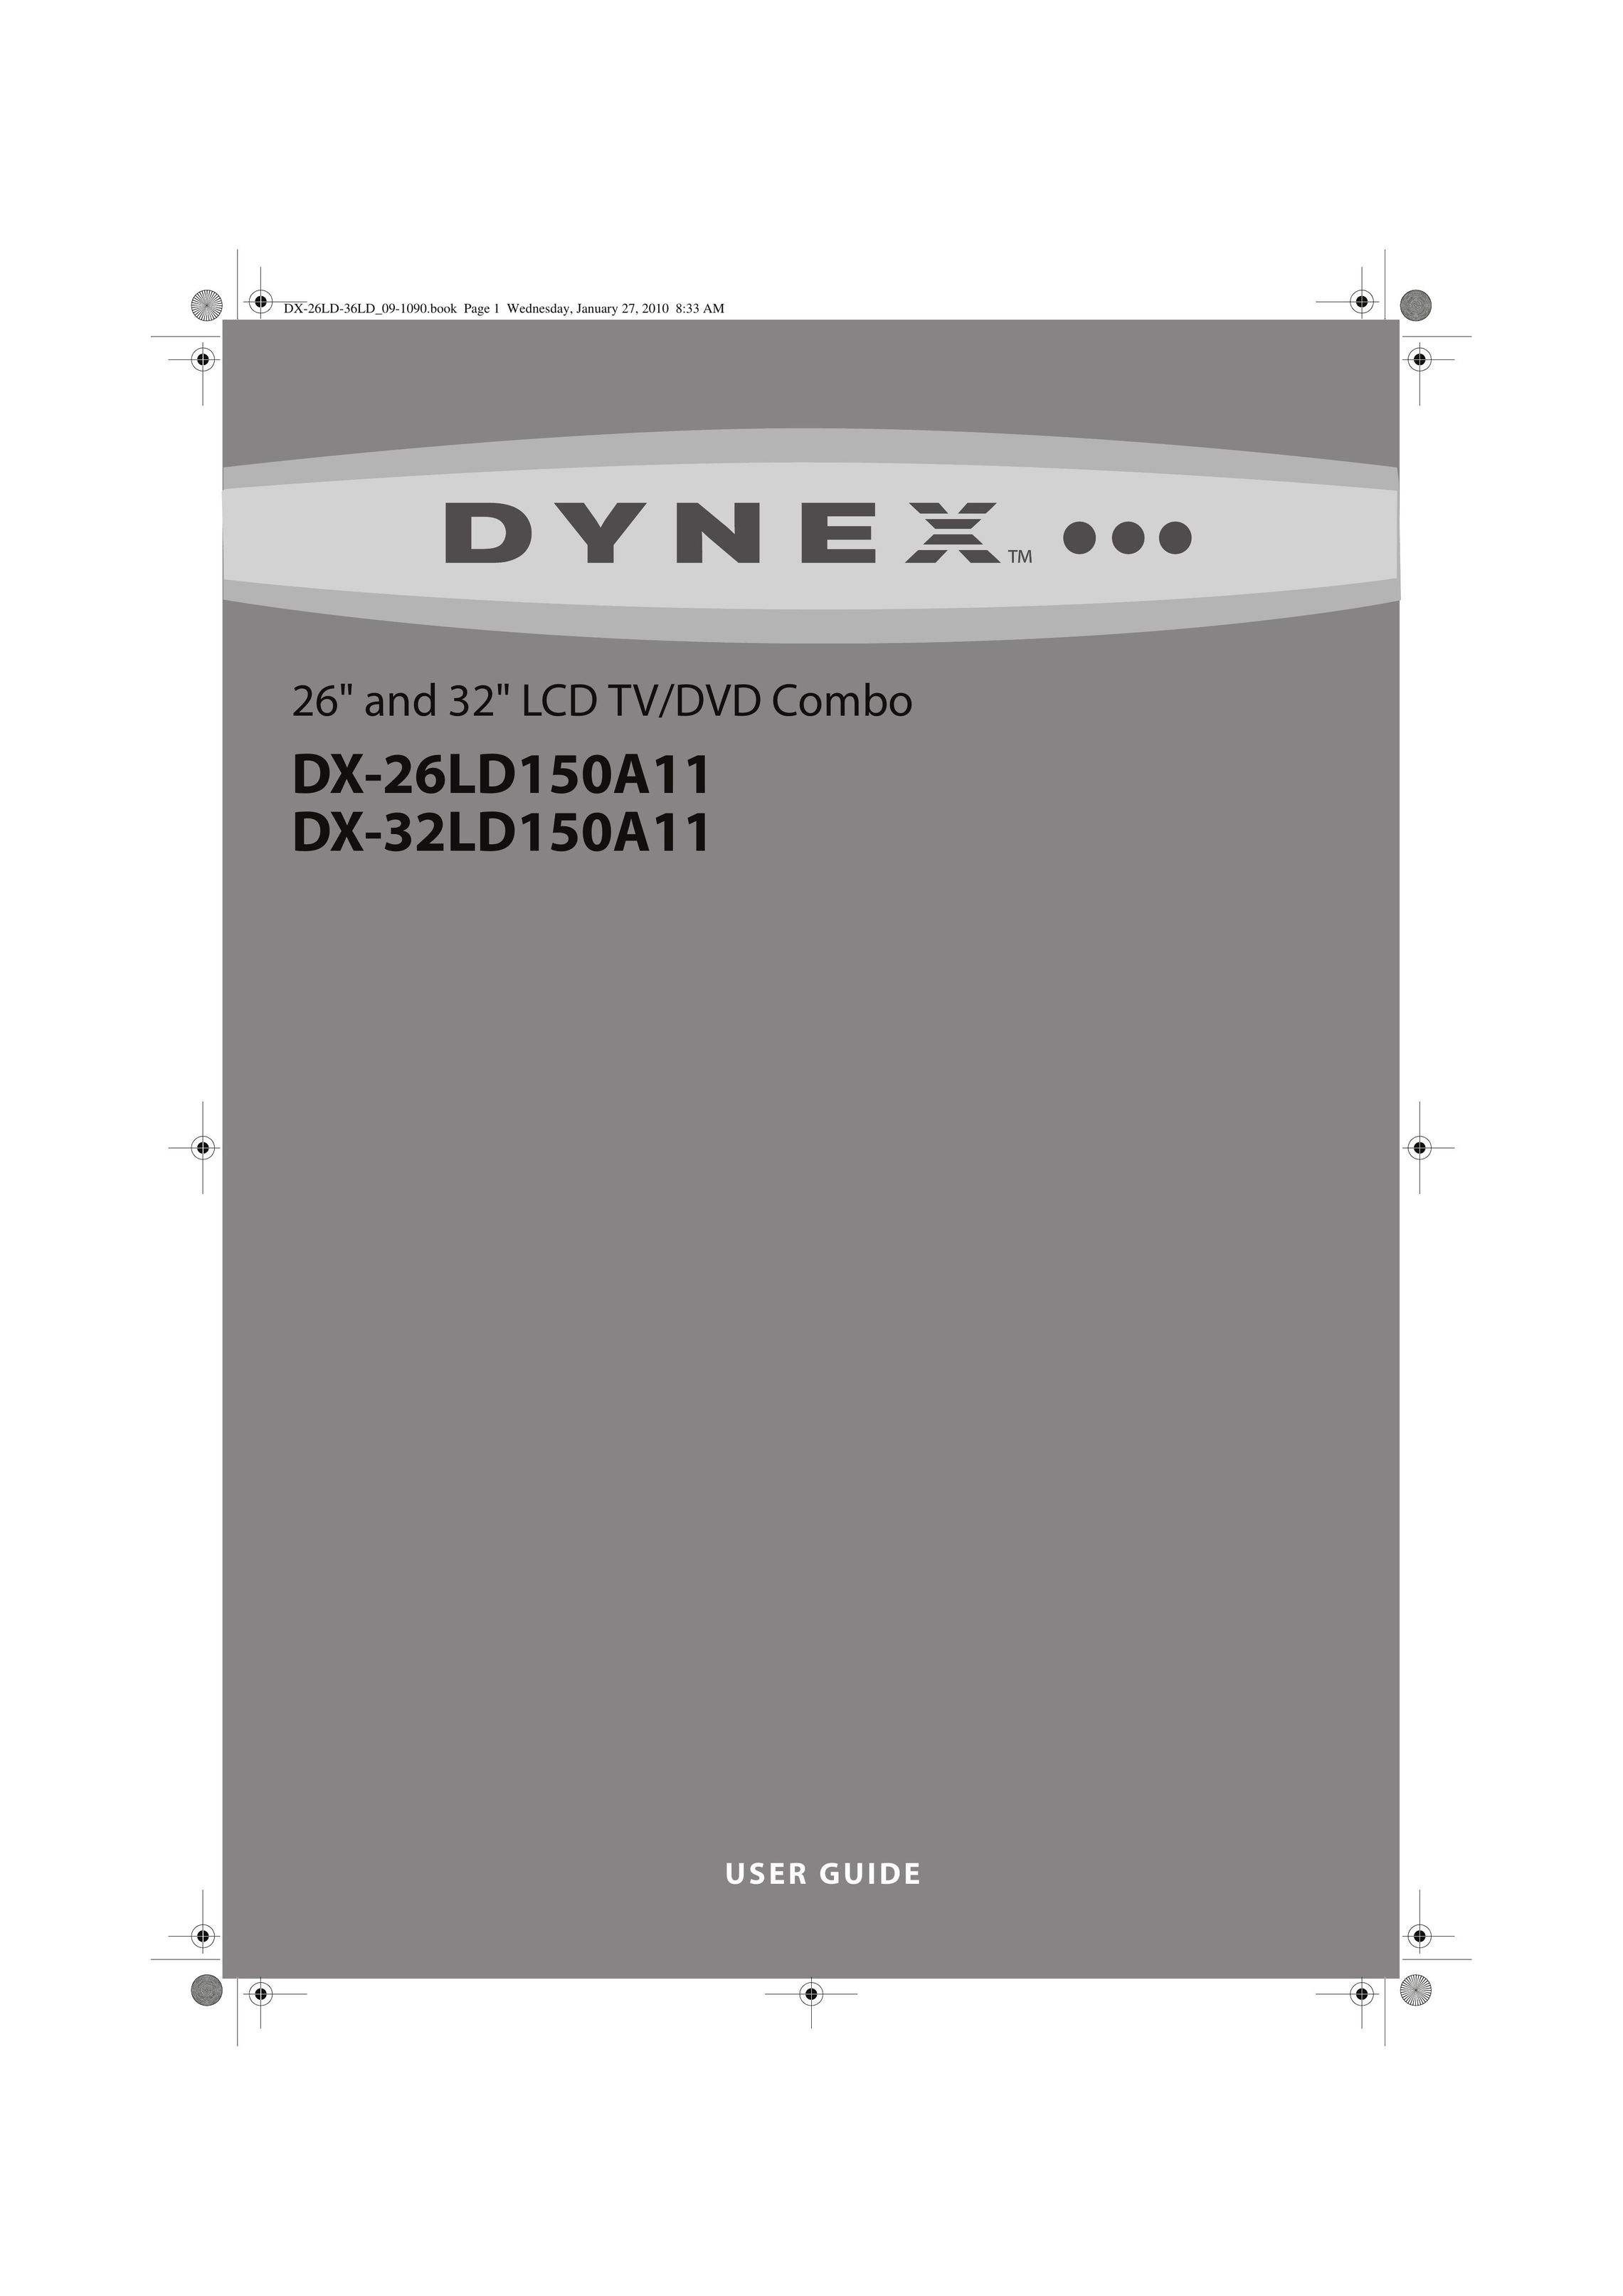 Dynex DX-32LD150A11 TV DVD Combo User Manual (Page 1)